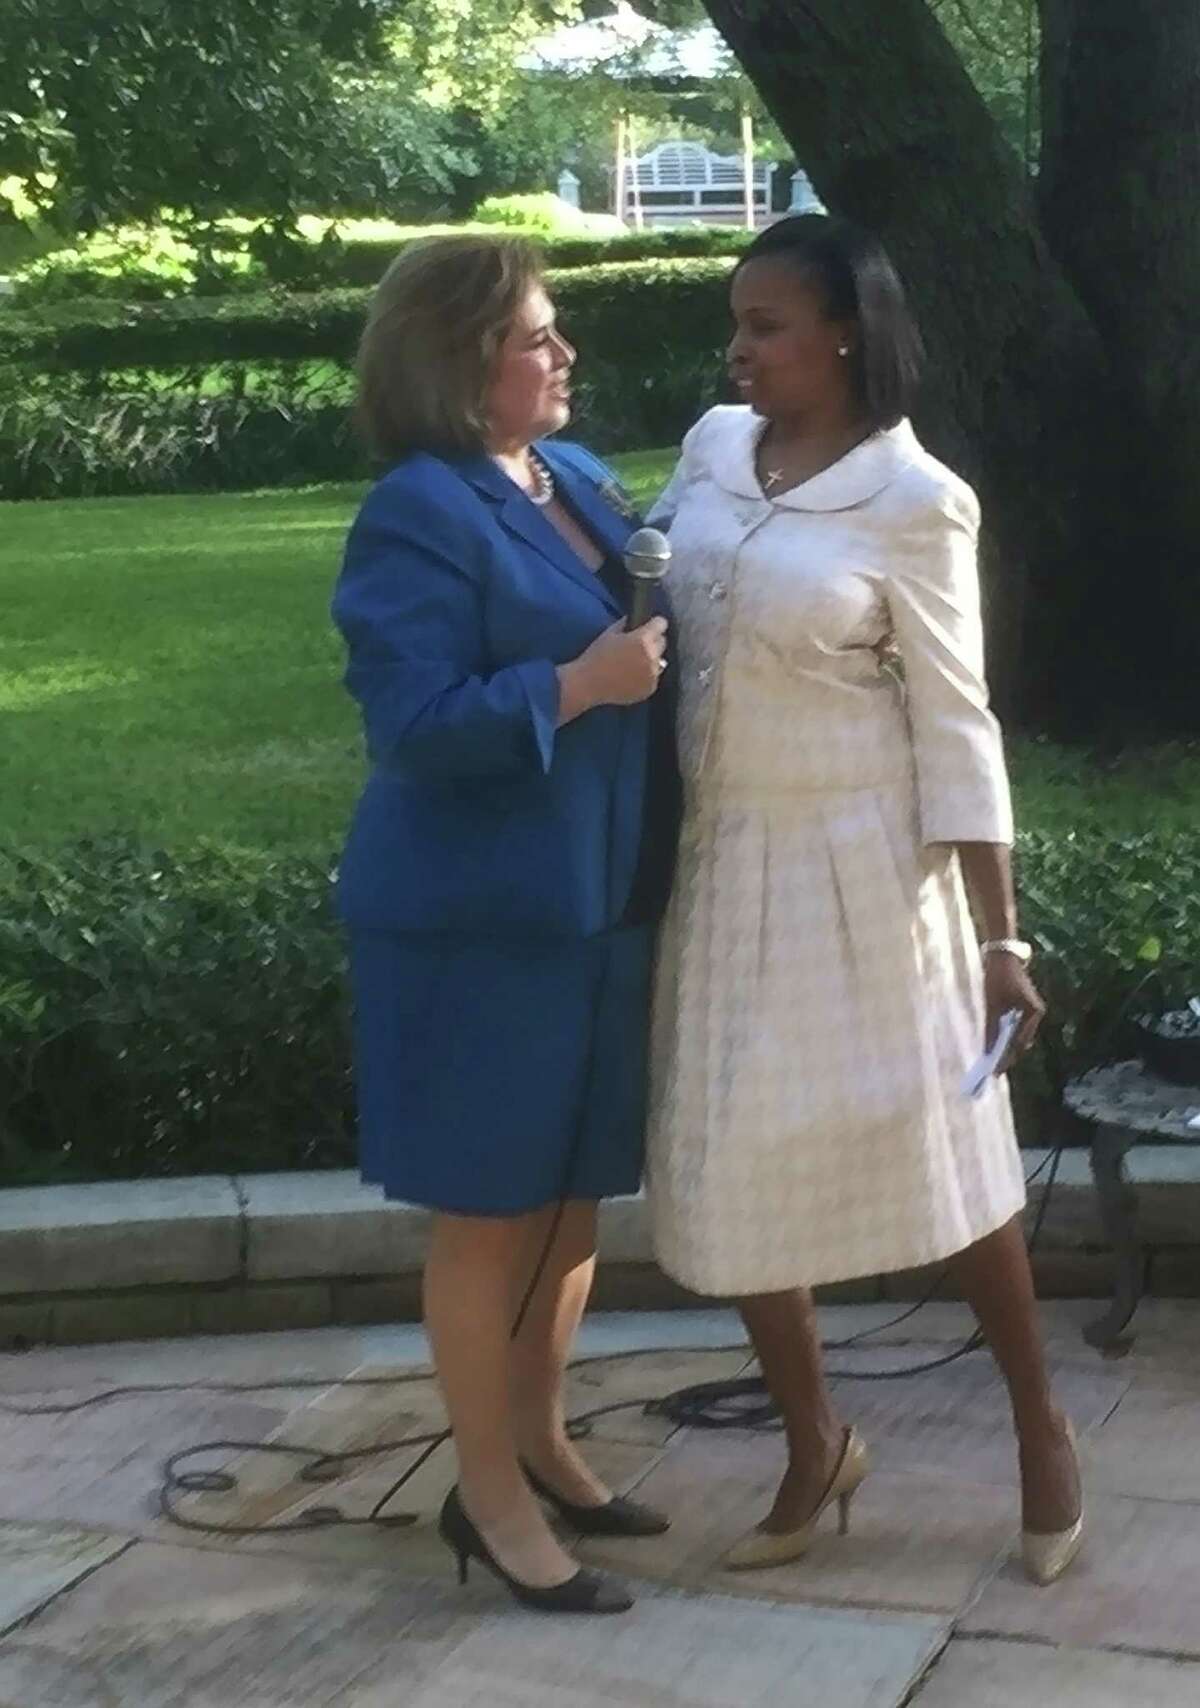 A photo from Mayor Ivy Taylor's Facebook page shows Ivy and her former political advesary Leticia Van de Putte at a fundraiser on September 7, 2014. The caption reads "I am both honored and grateful to receive your support, Leticia Van de Putte."